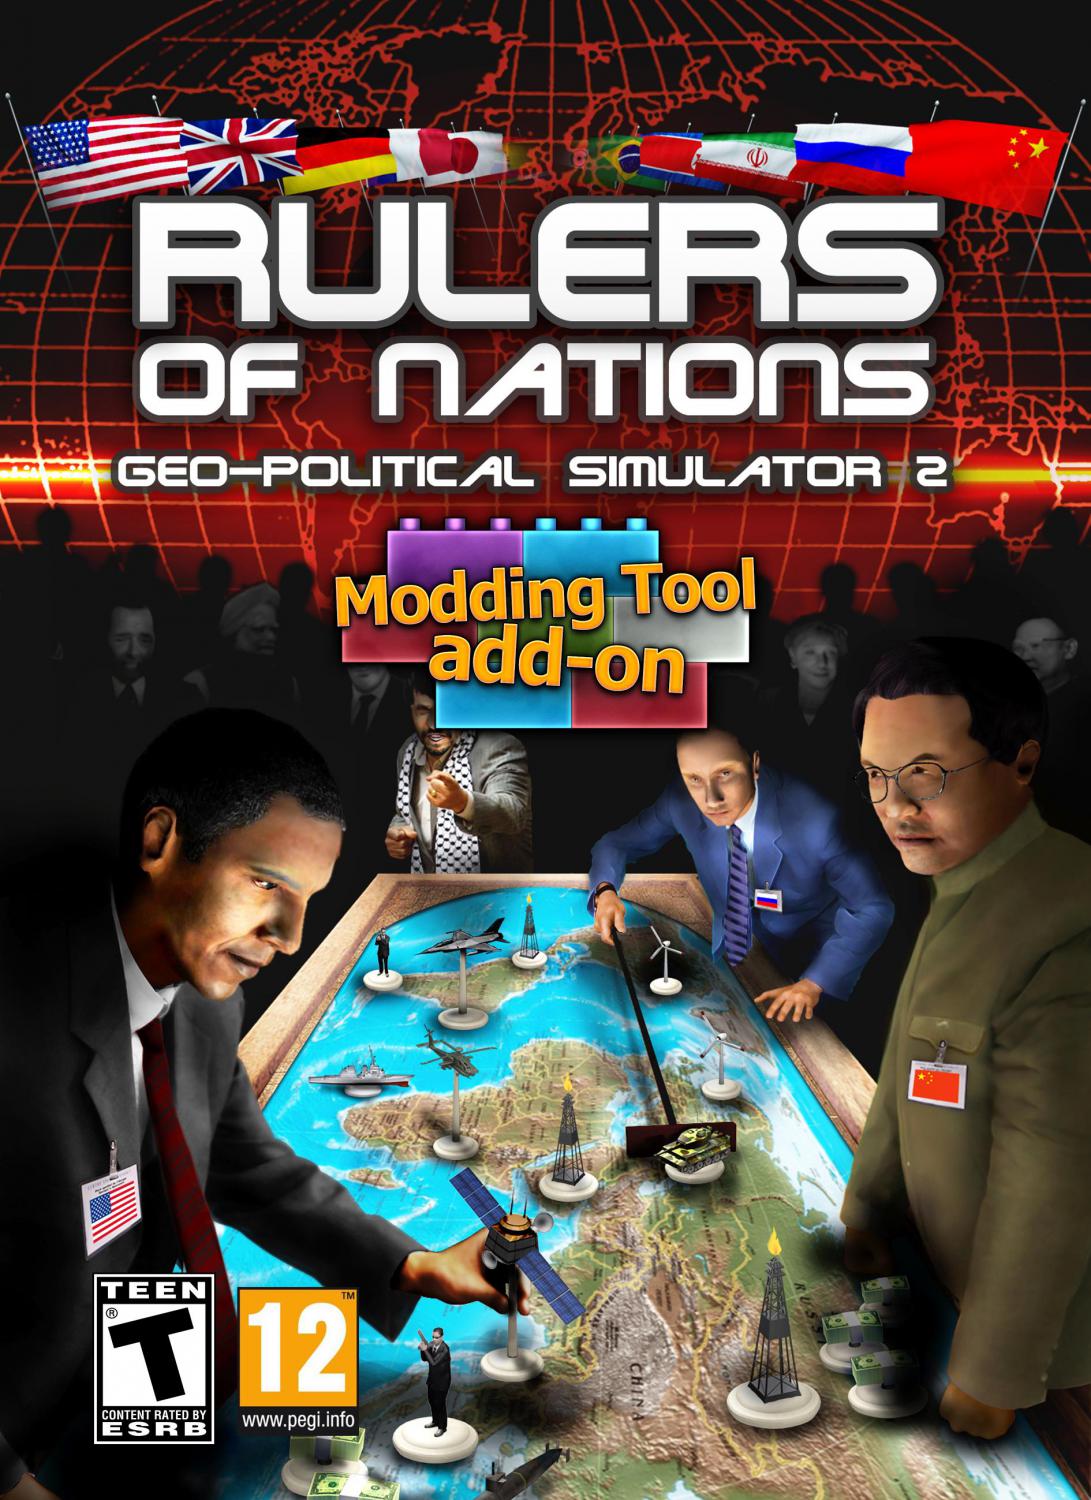 Modding Tool add-on for Rulers of Nations